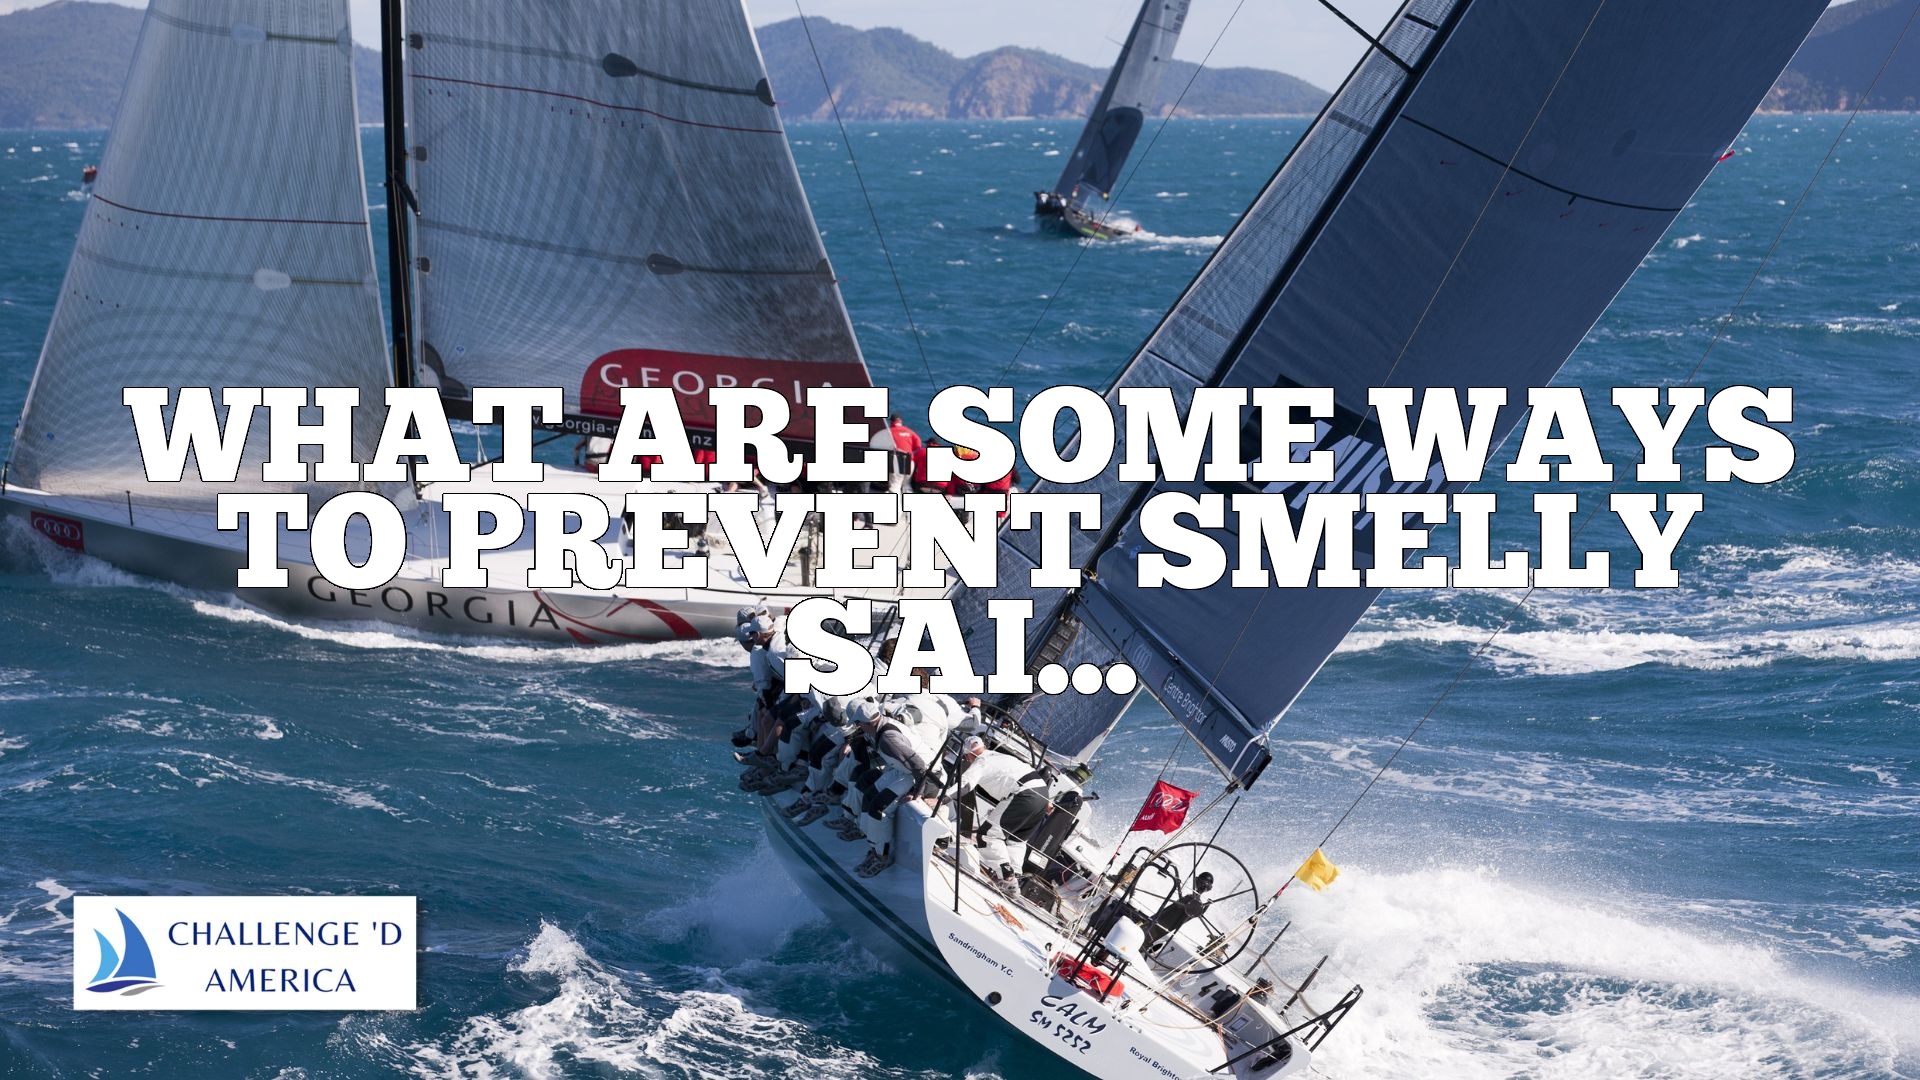 What Are Some Ways To Prevent Smelly Sailing Shoes?